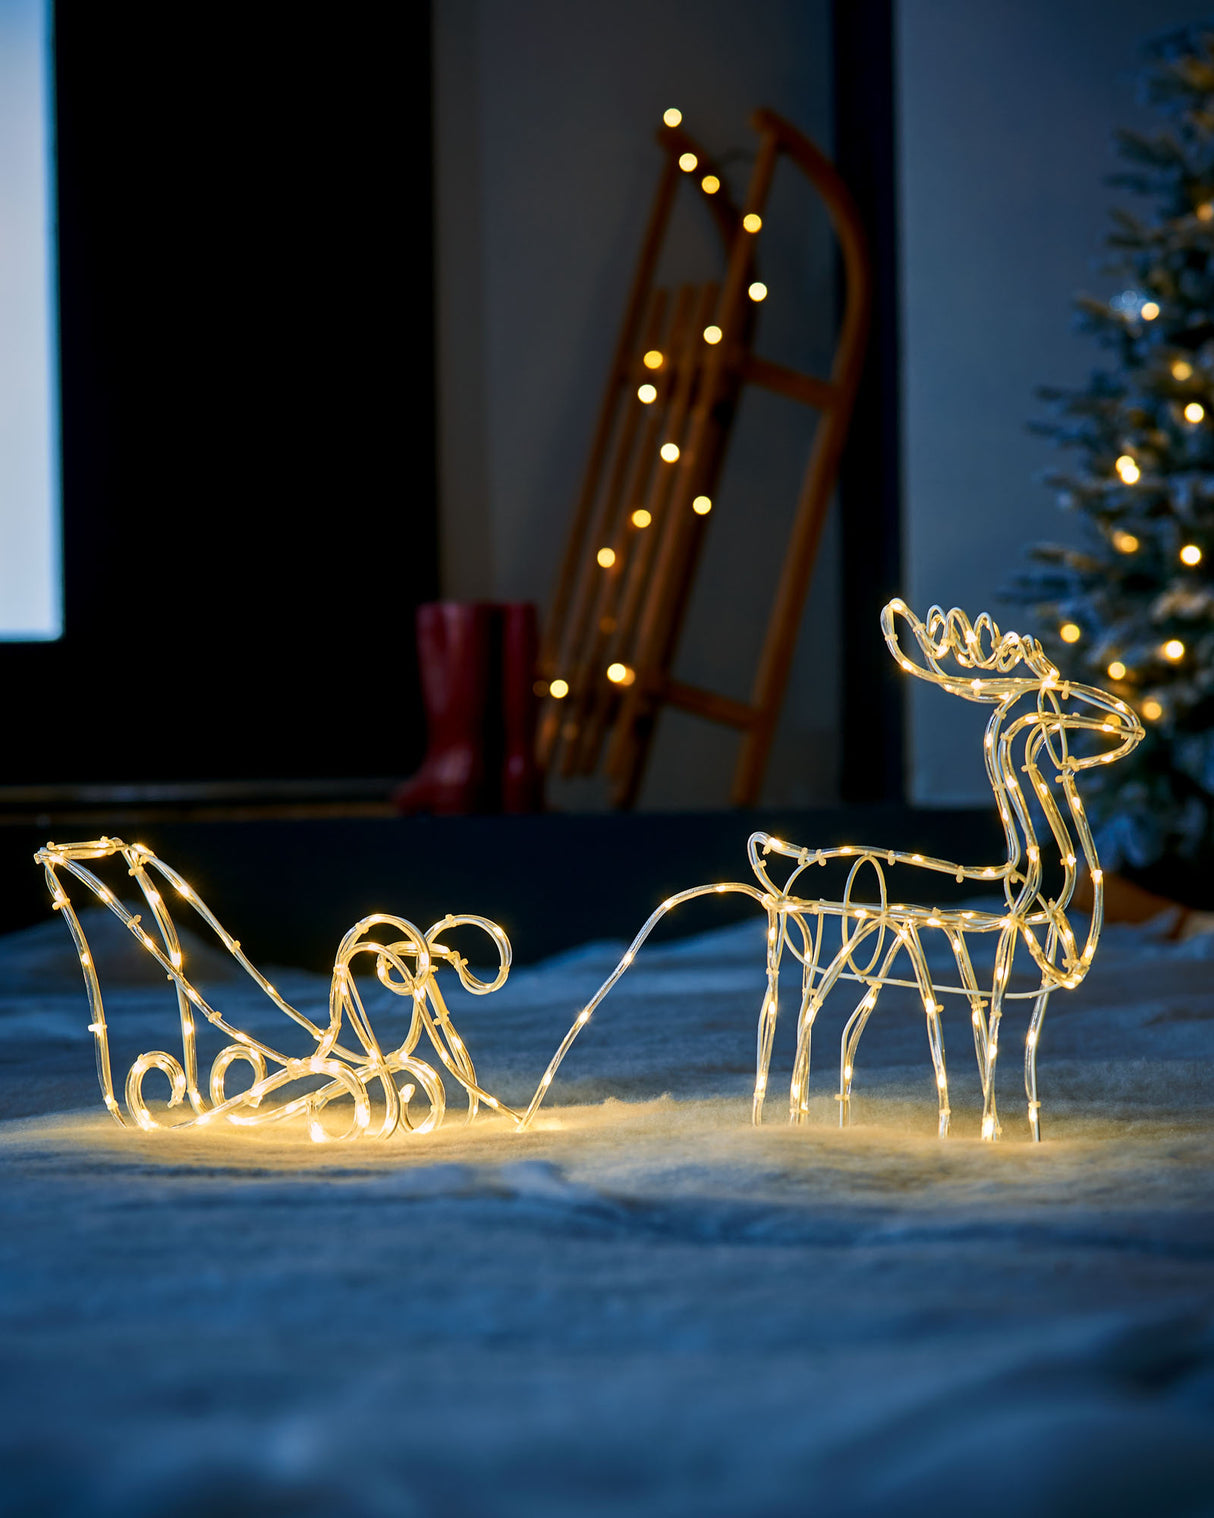 3D Reindeer with Sleigh Rope Light Silhouette, 120 cm